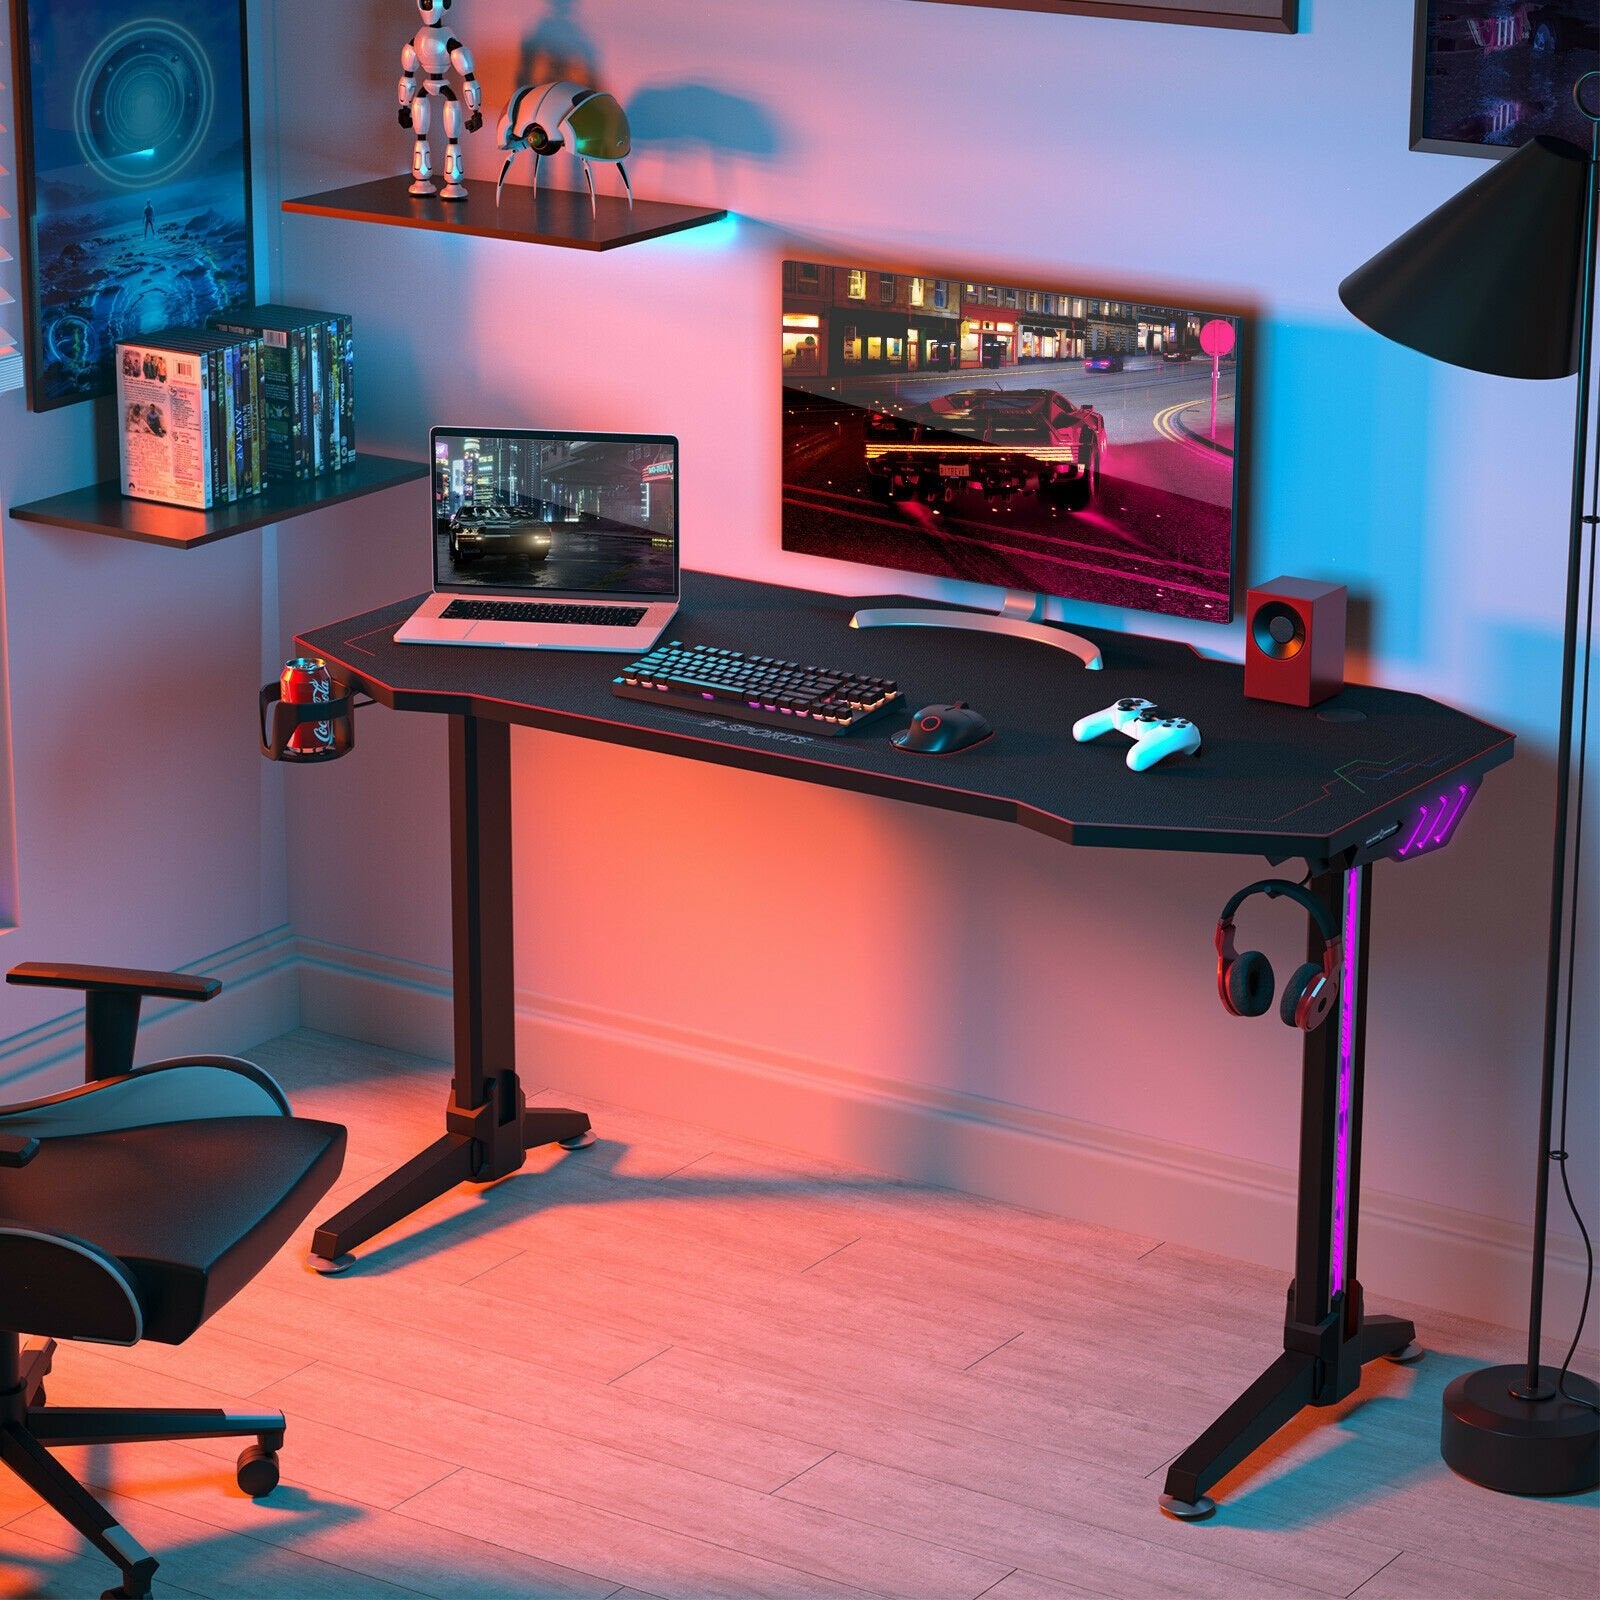 55 Inches T-shaped Computer Desk with Full Mouse Pad and LED Lights, Black - Gallery Canada